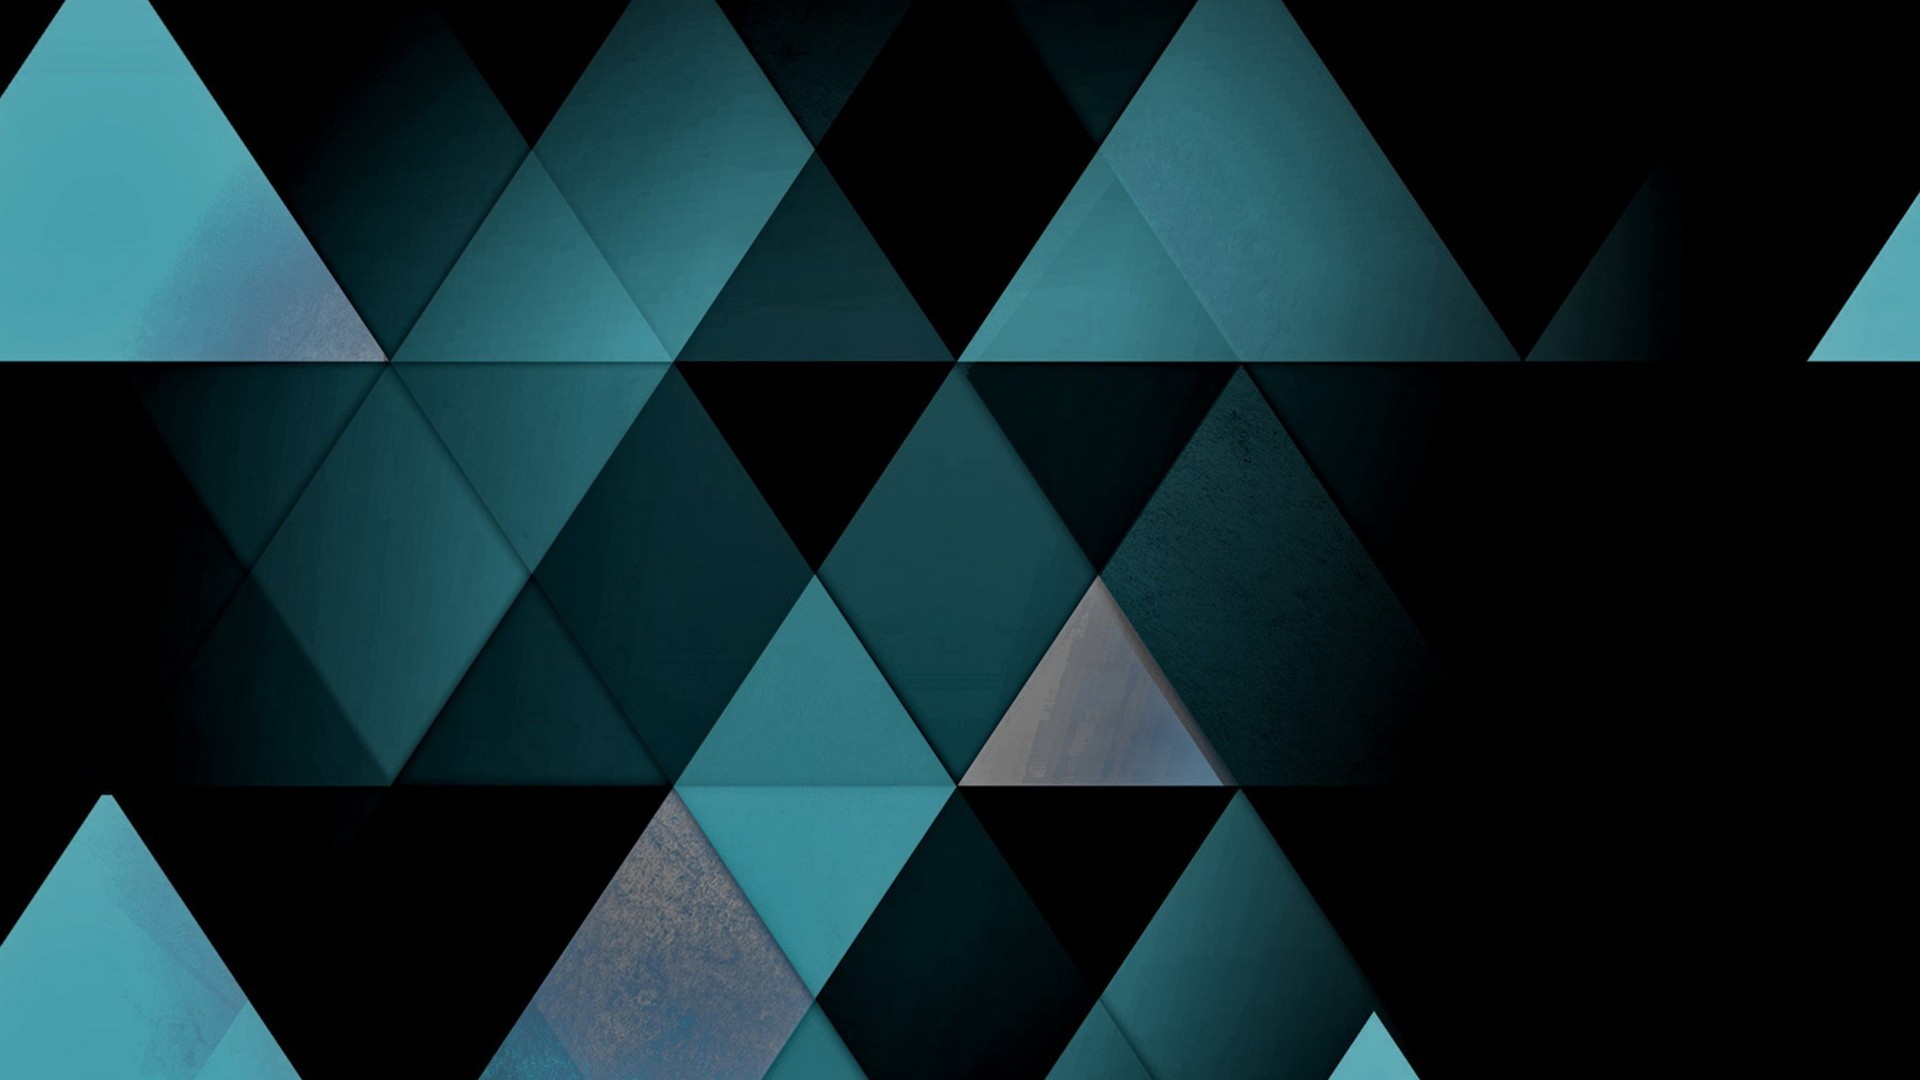 Wallpaper of Geometric With high-resolution 1920X1080 pixel. You can use and set as wallpaper for Notebook Screensavers, Mac Wallpapers, Mobile Home Screen, iPhone or Android Phones Lock Screen